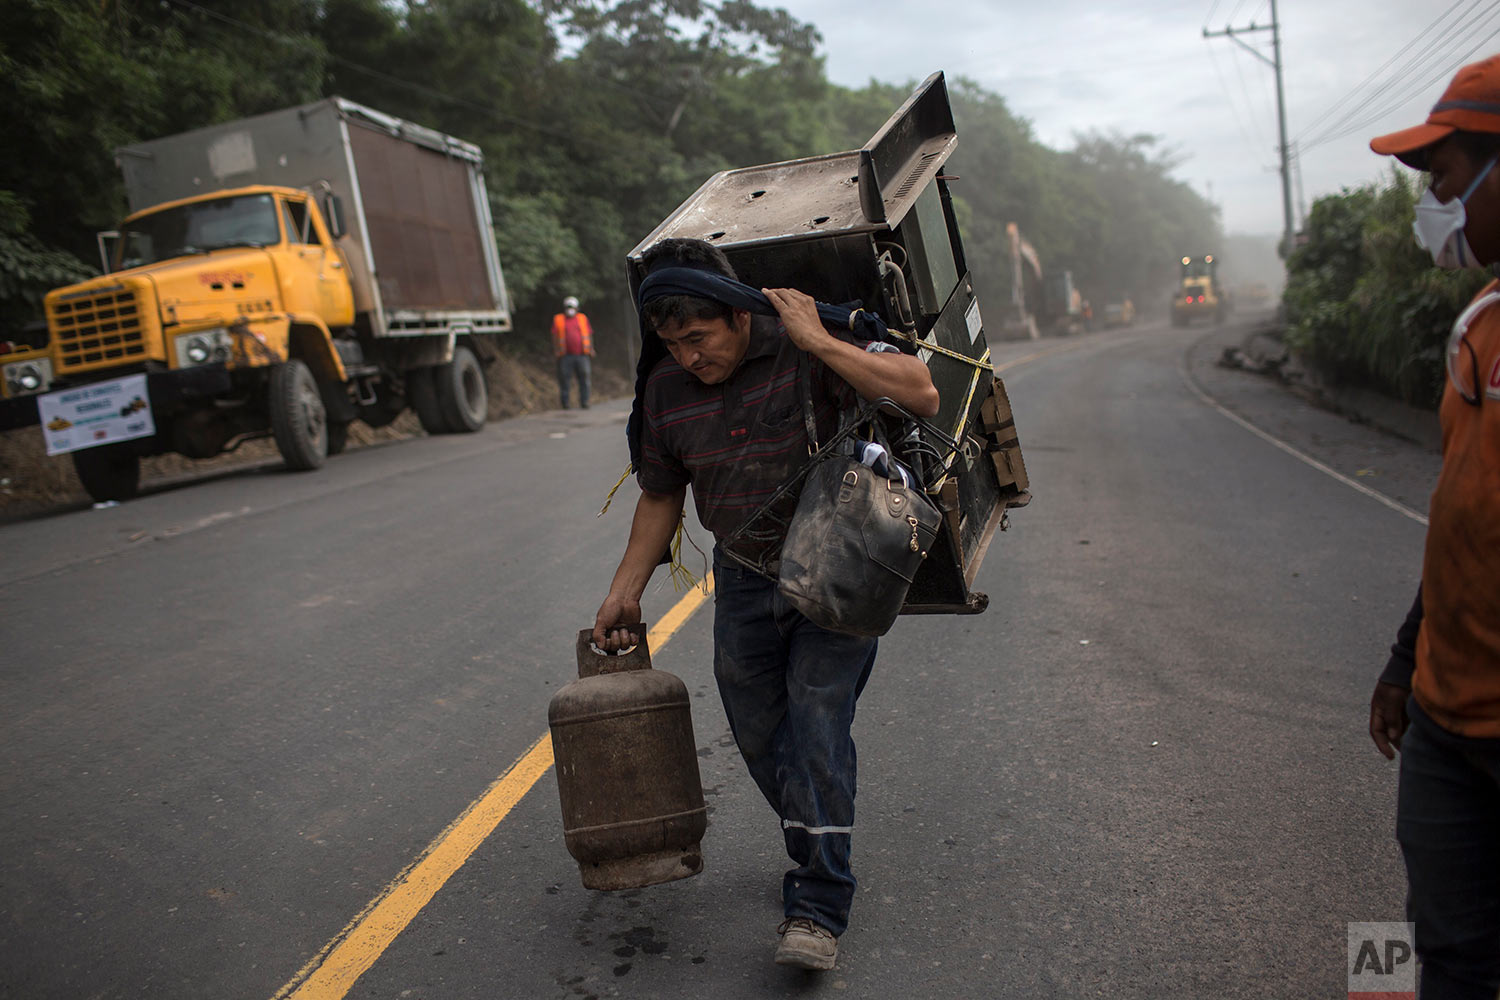  A resident carries a stove and gas can recovered from his volcano-destroyed home, following the eruption of the Volcano of Fire in San Miguel Los Lotes, Guatemala, June 10, 2018. (AP Photo/Rodrigo Abd) 